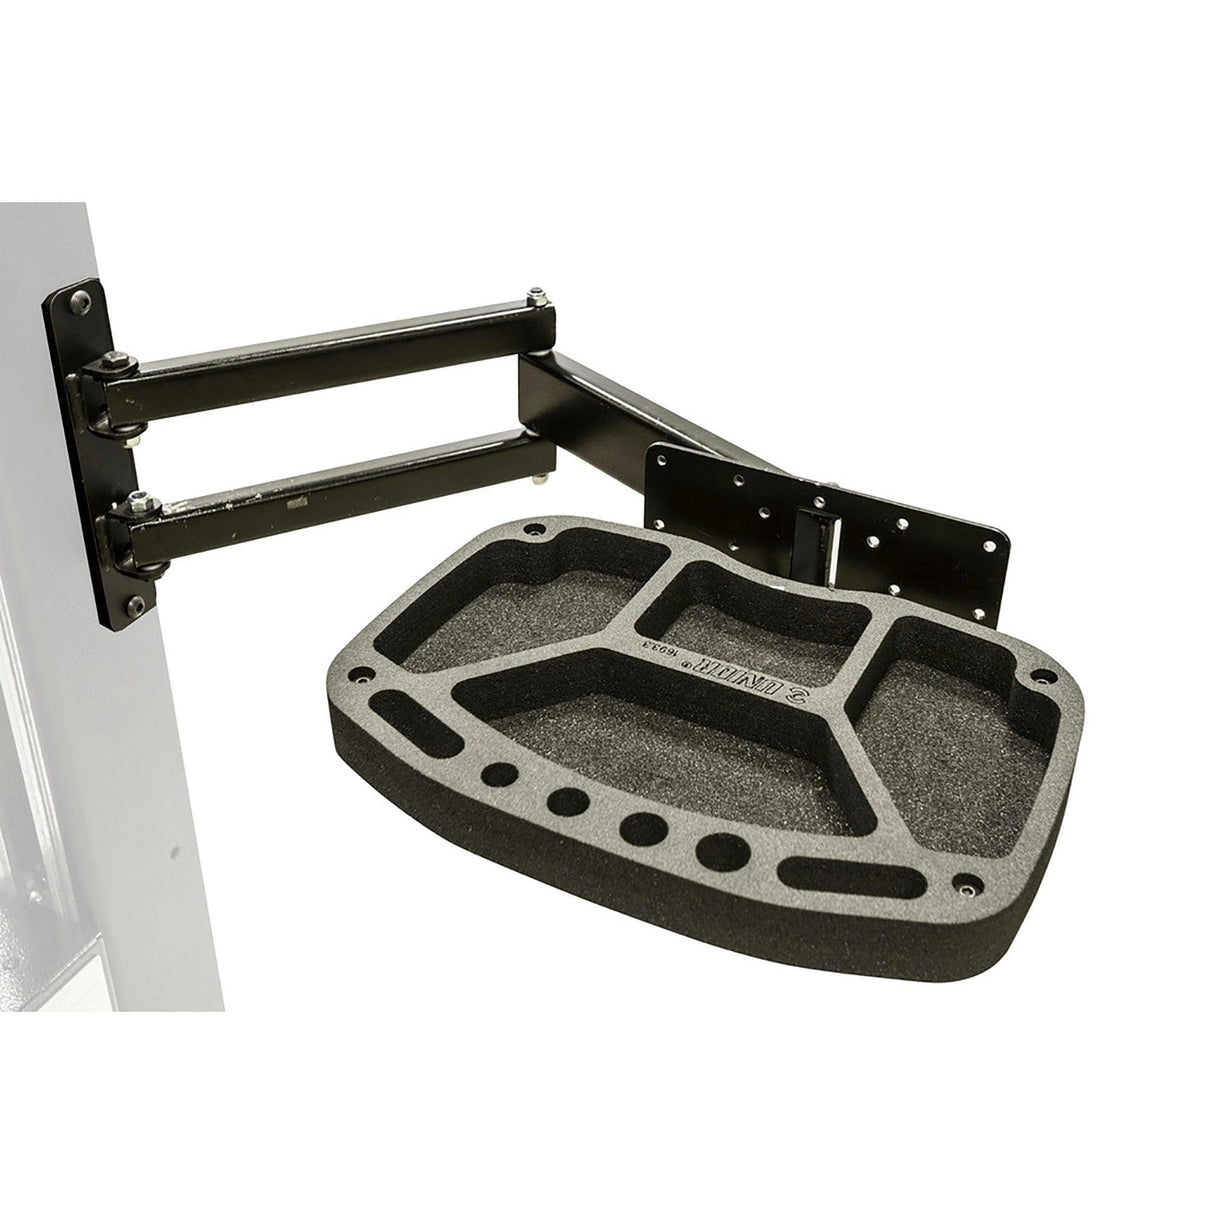 Unior Tool Tray With Foldable Arm For 1693El: